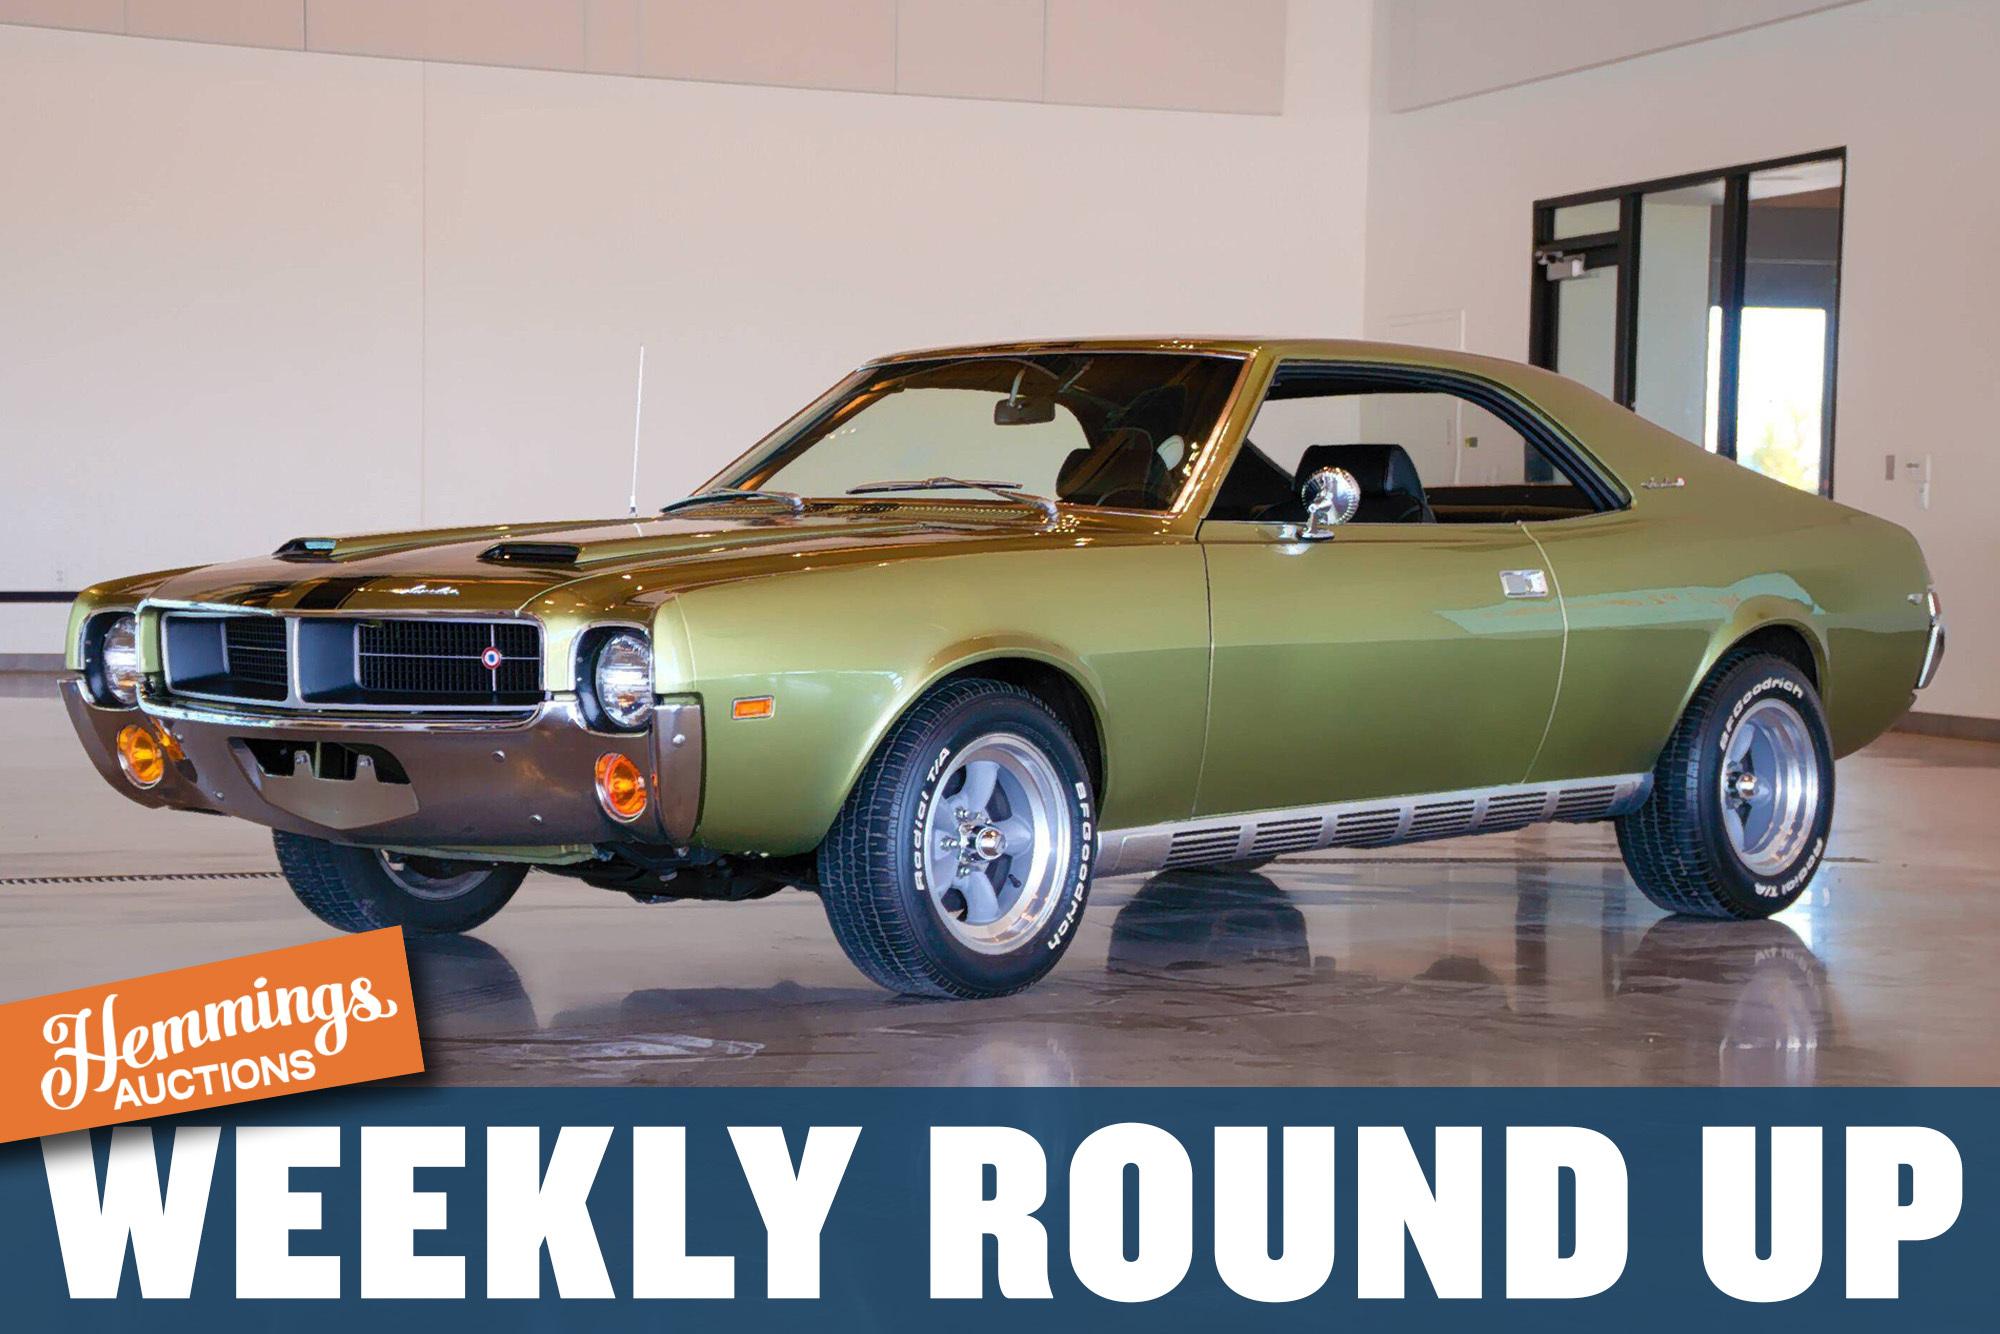 A performance-modified AMC Javelin, showroom-fresh Ford Thunderbird, and restored Crosley Super Sports: Hemmings Auctions Weekly Round Up for September 18-24, 2022